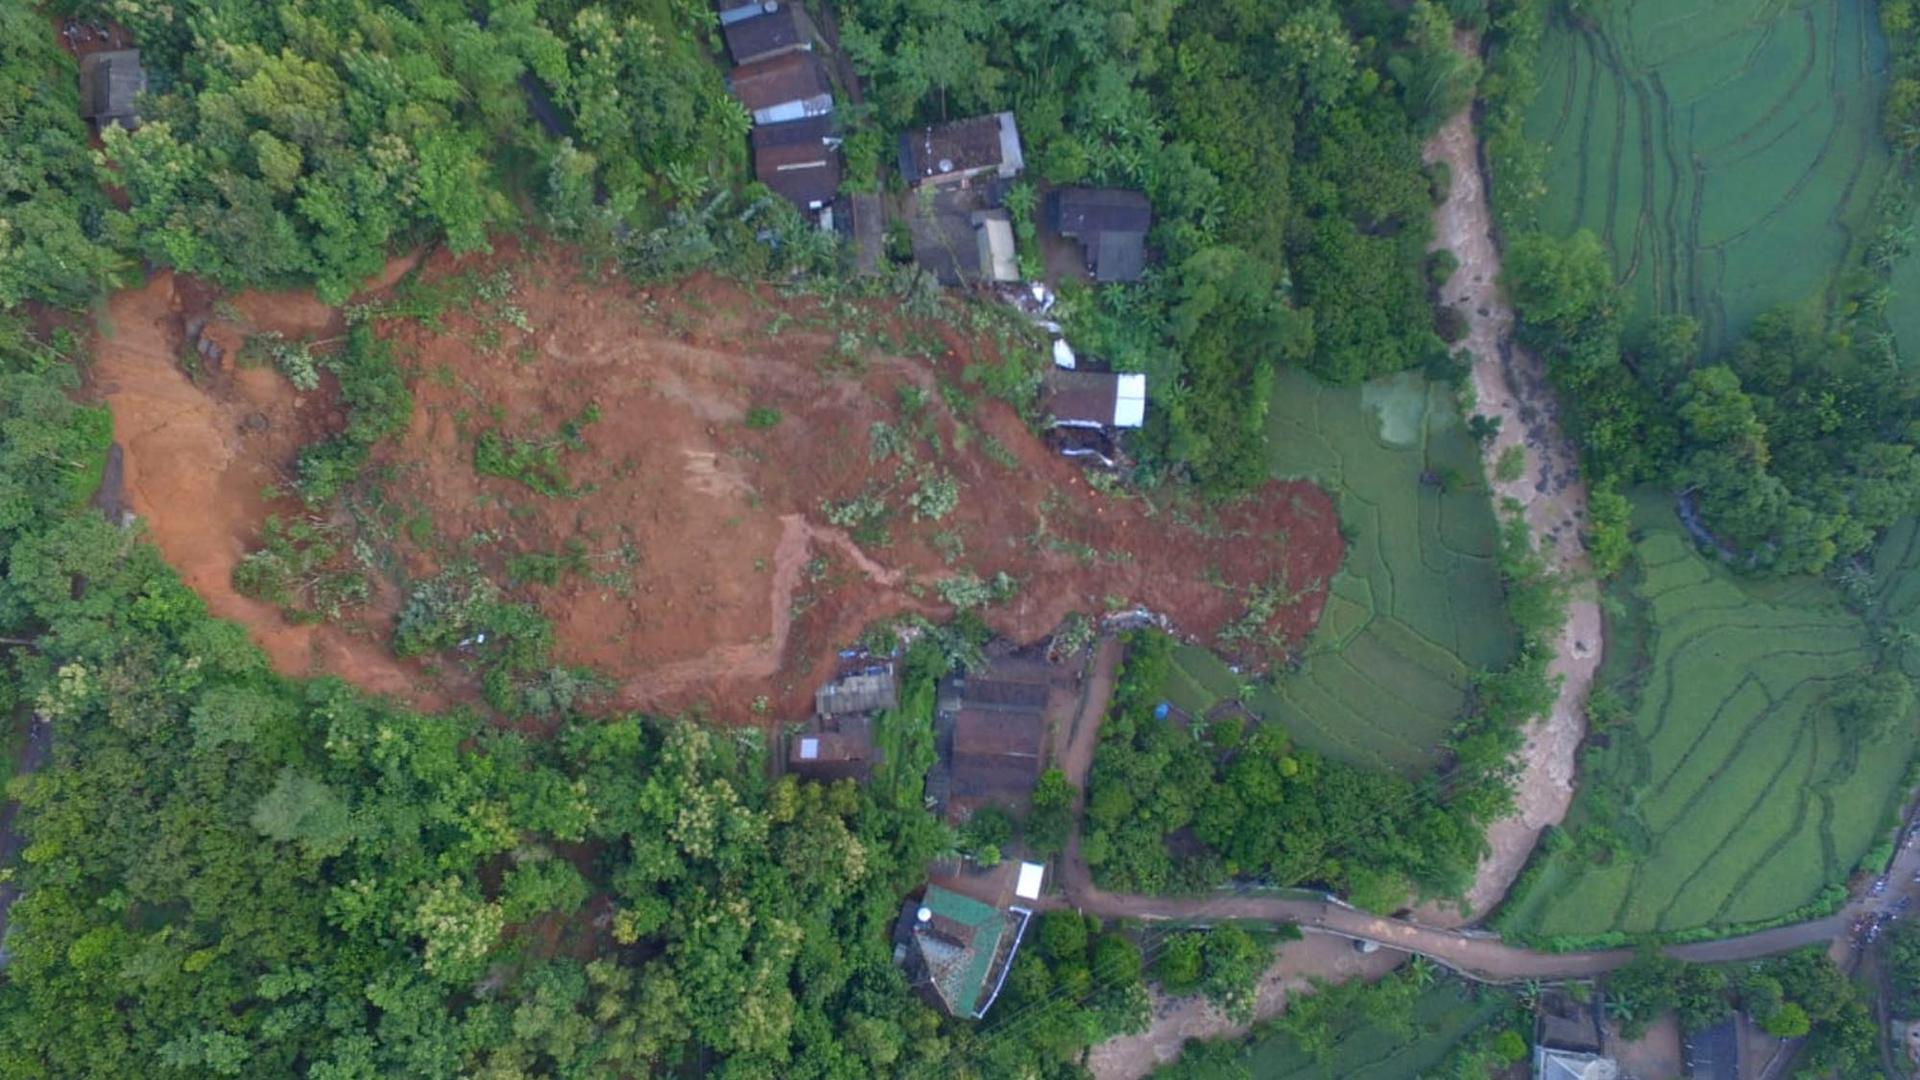 This aerial shot released by the Regional Disaster Mitigation Agency (BPBD) shows a village affected by a landslide in Nganjuk, East Java, Indonesia, Monday, Feb. 15, 2021. 